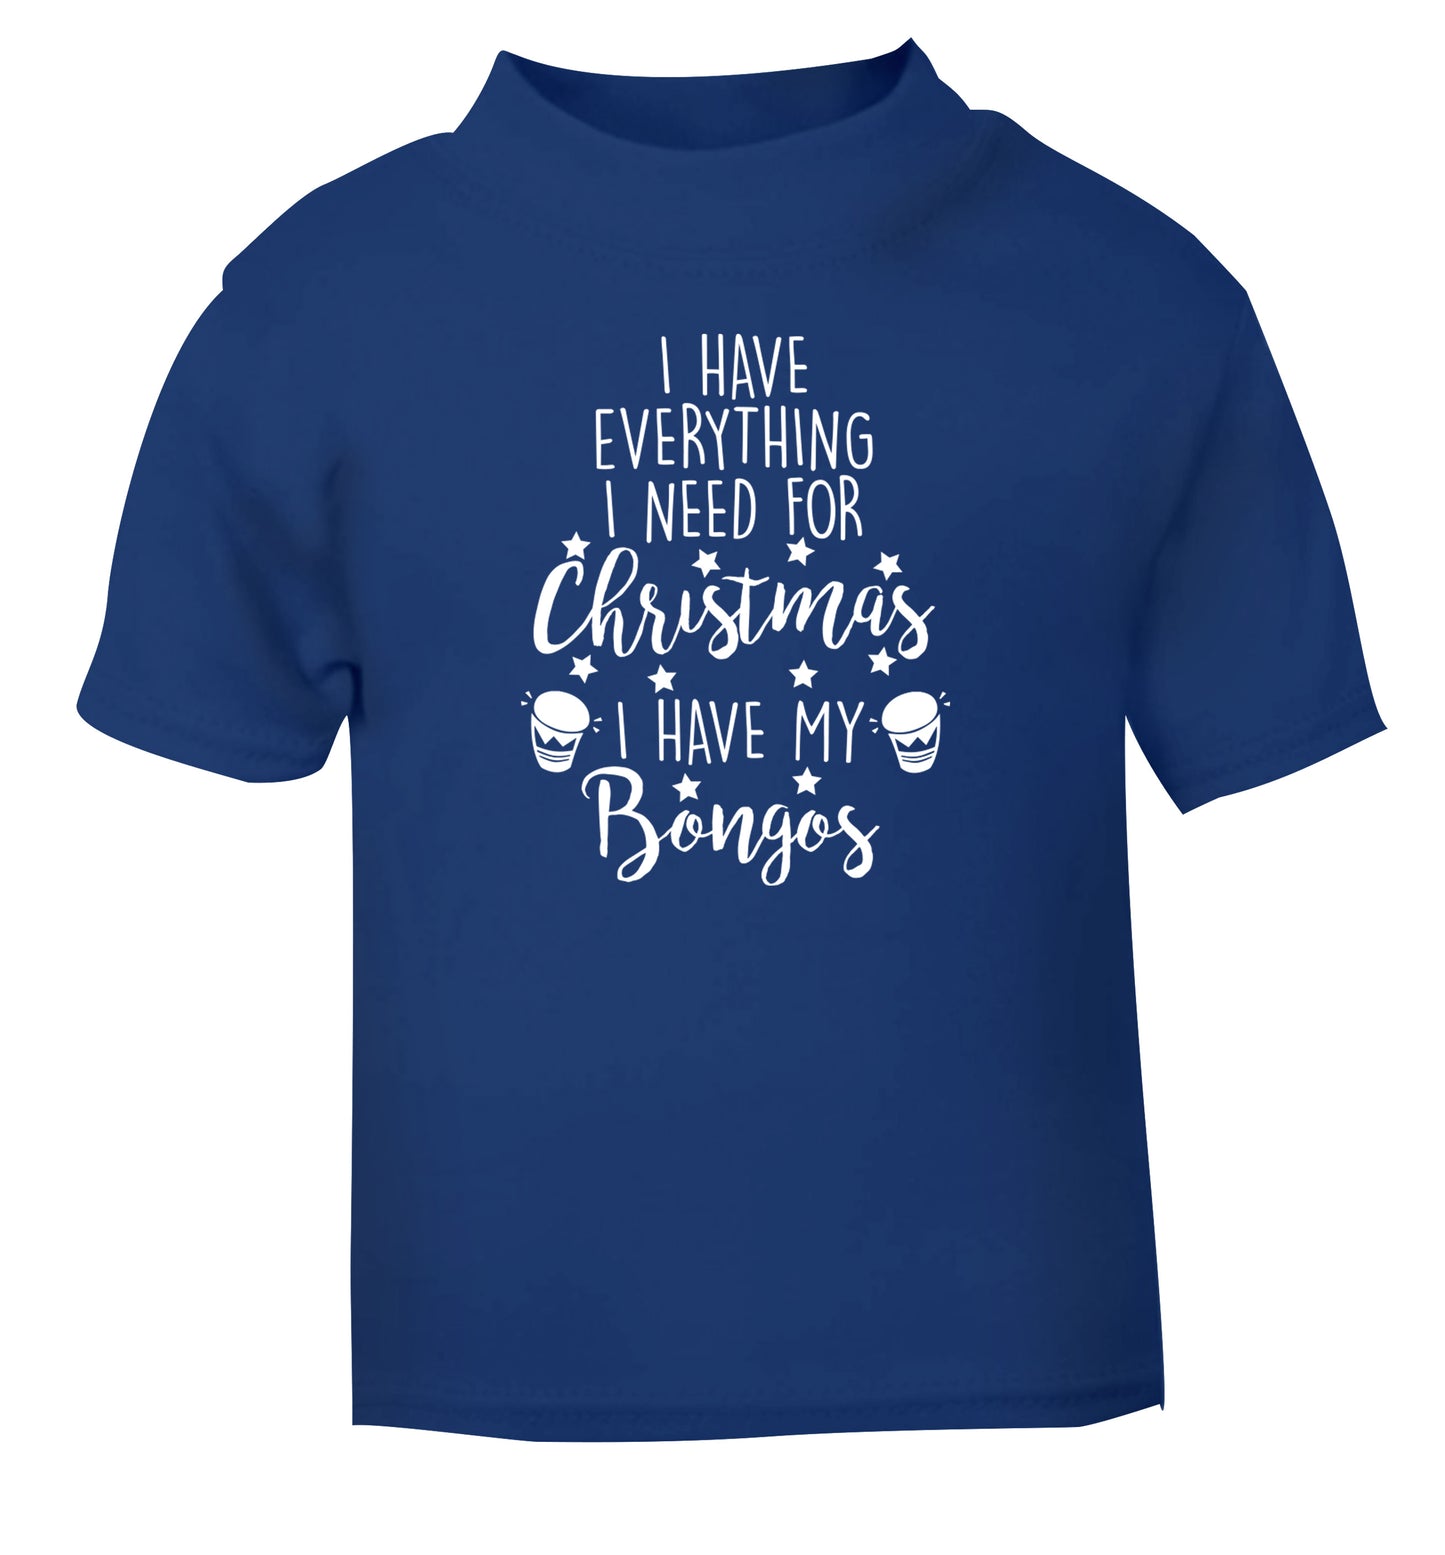 I have everything I need for Christmas I have my bongos! blue Baby Toddler Tshirt 2 Years